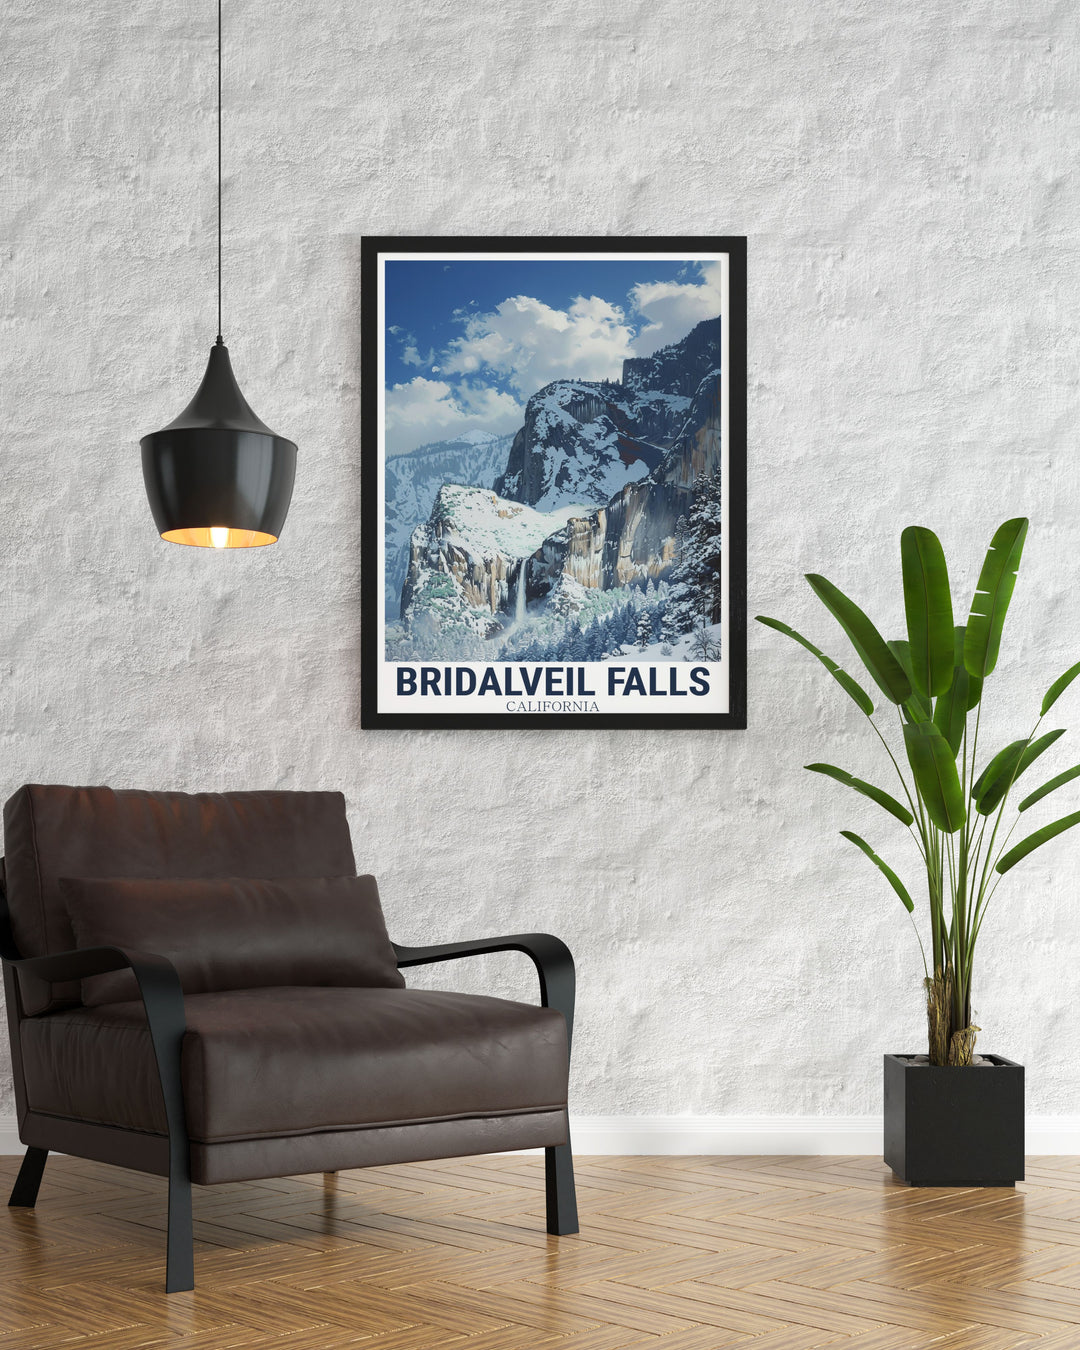 View from winter Bridalveil Falls poster showcasing the dramatic waterfall and snow covered surroundings. This California travel print is an excellent addition to any art collection or home decor bringing the beauty of Yosemite National Park into your living space.